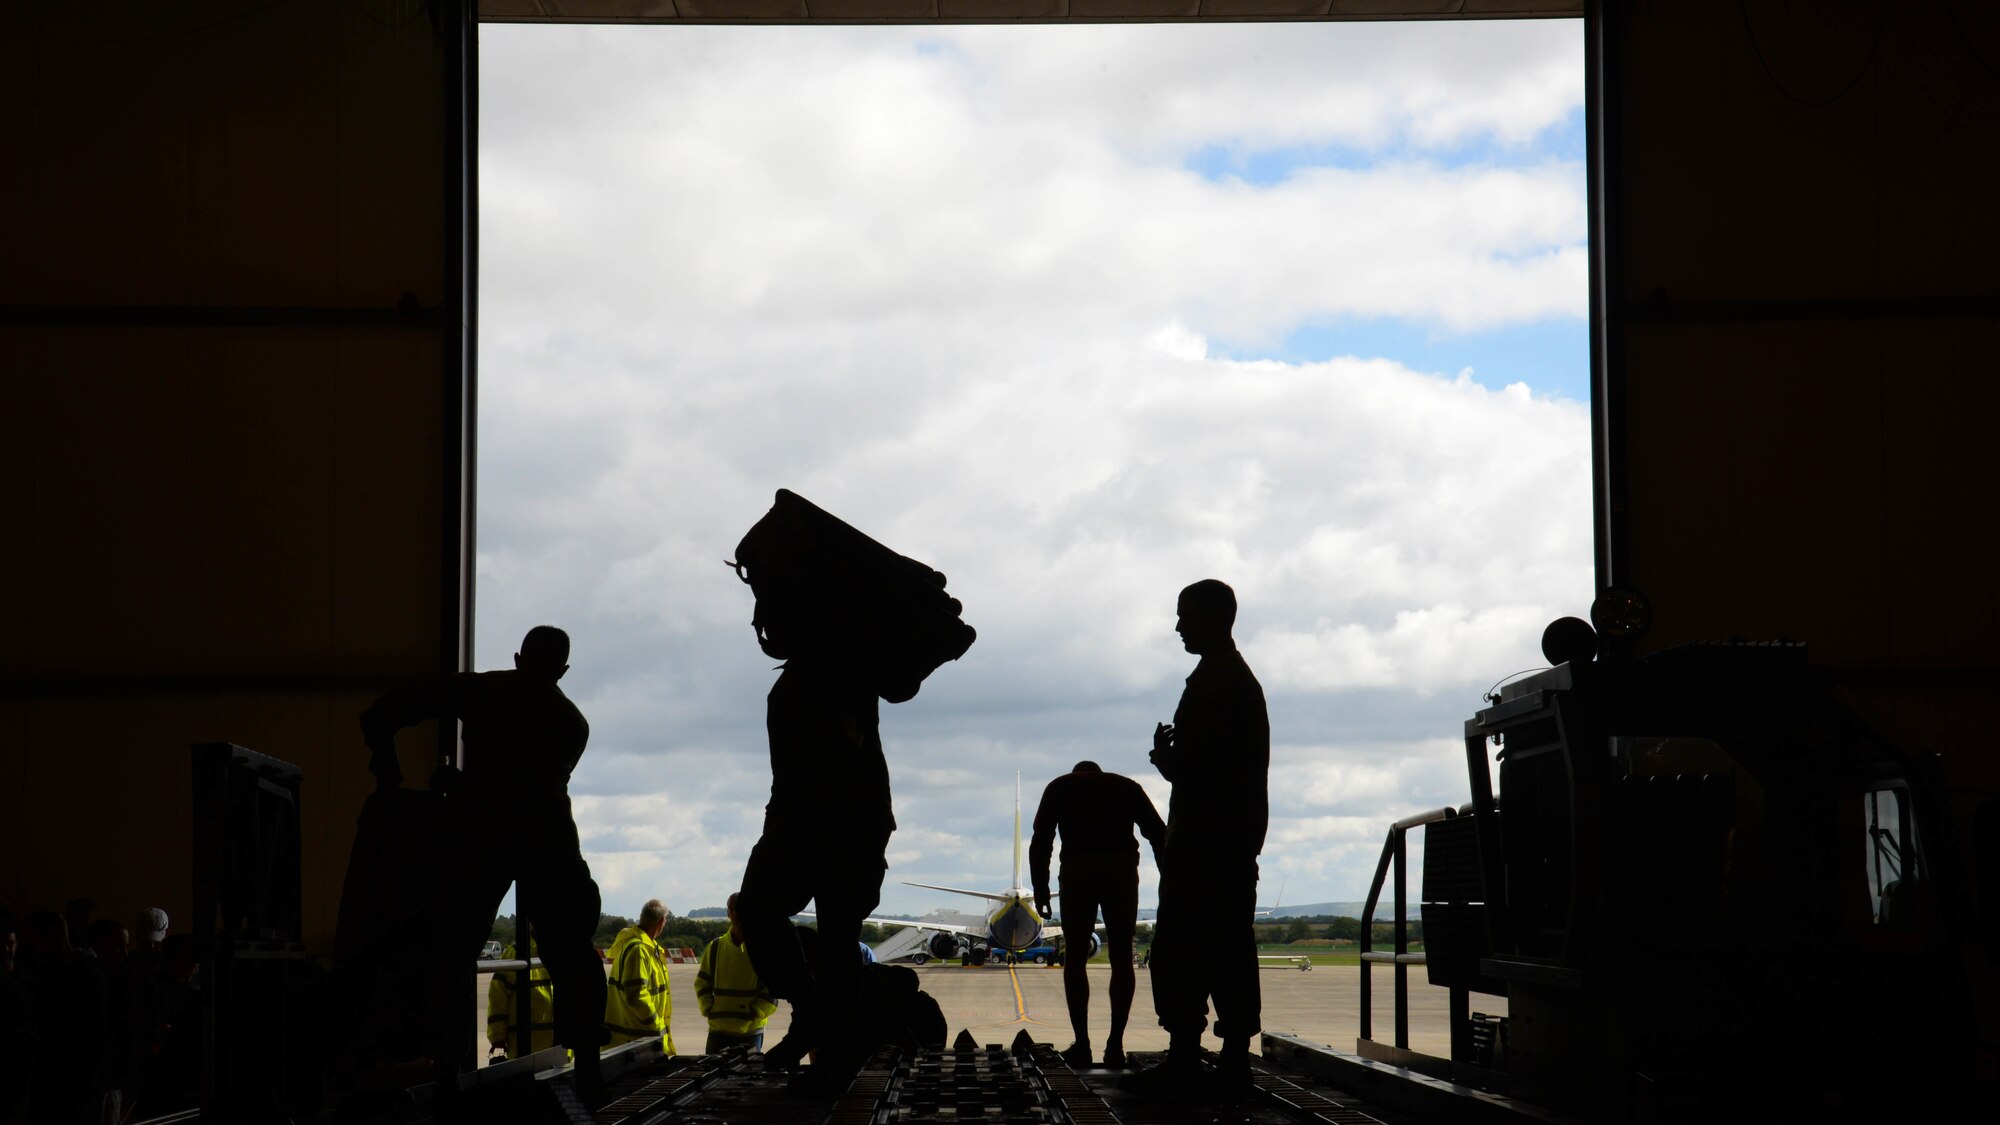 Airmen and volunteers help unload luggage from a truck after their arrival to Fairford Royal Air Force Base, Sept. 11, 2017.